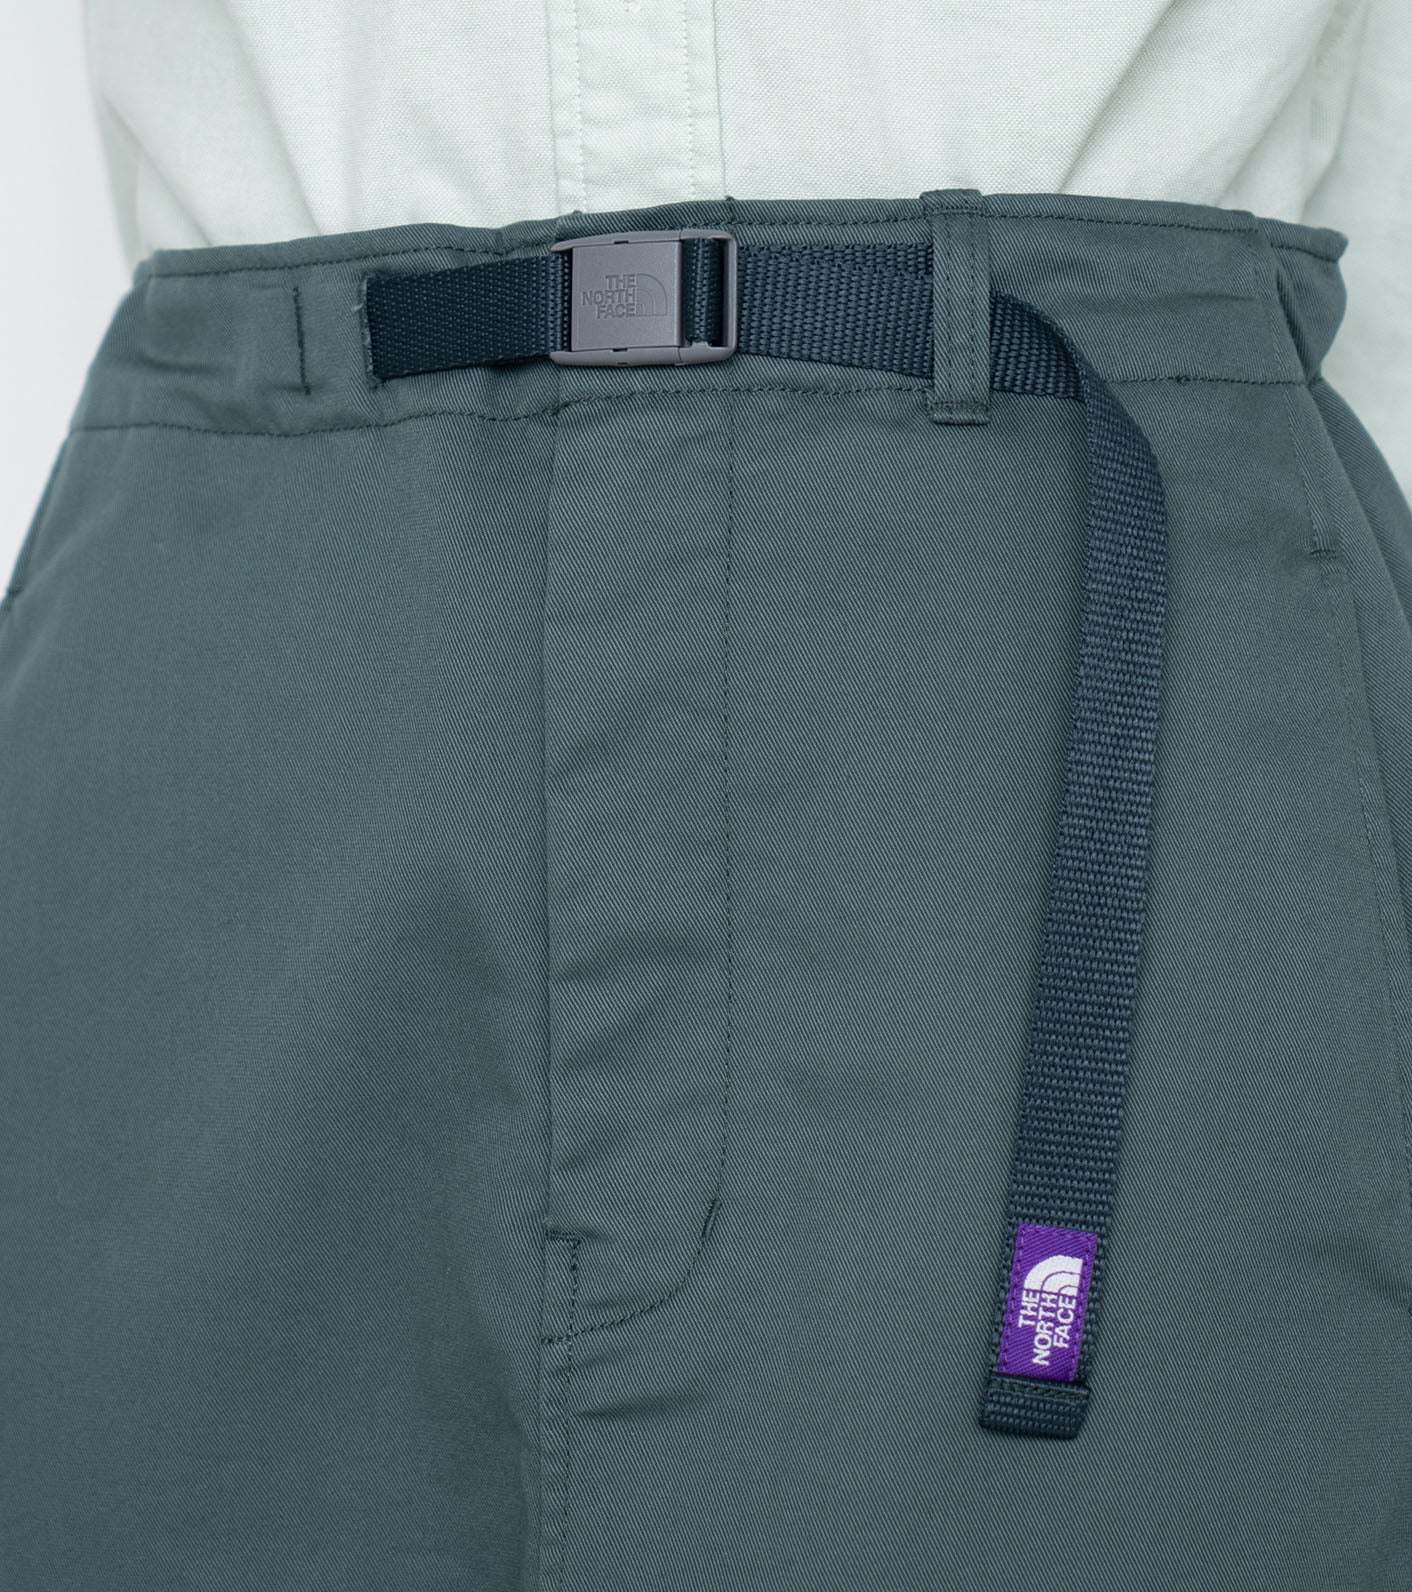 THE NORTH FACE PURPLE LABEL Stretch Twill Flared Skirt